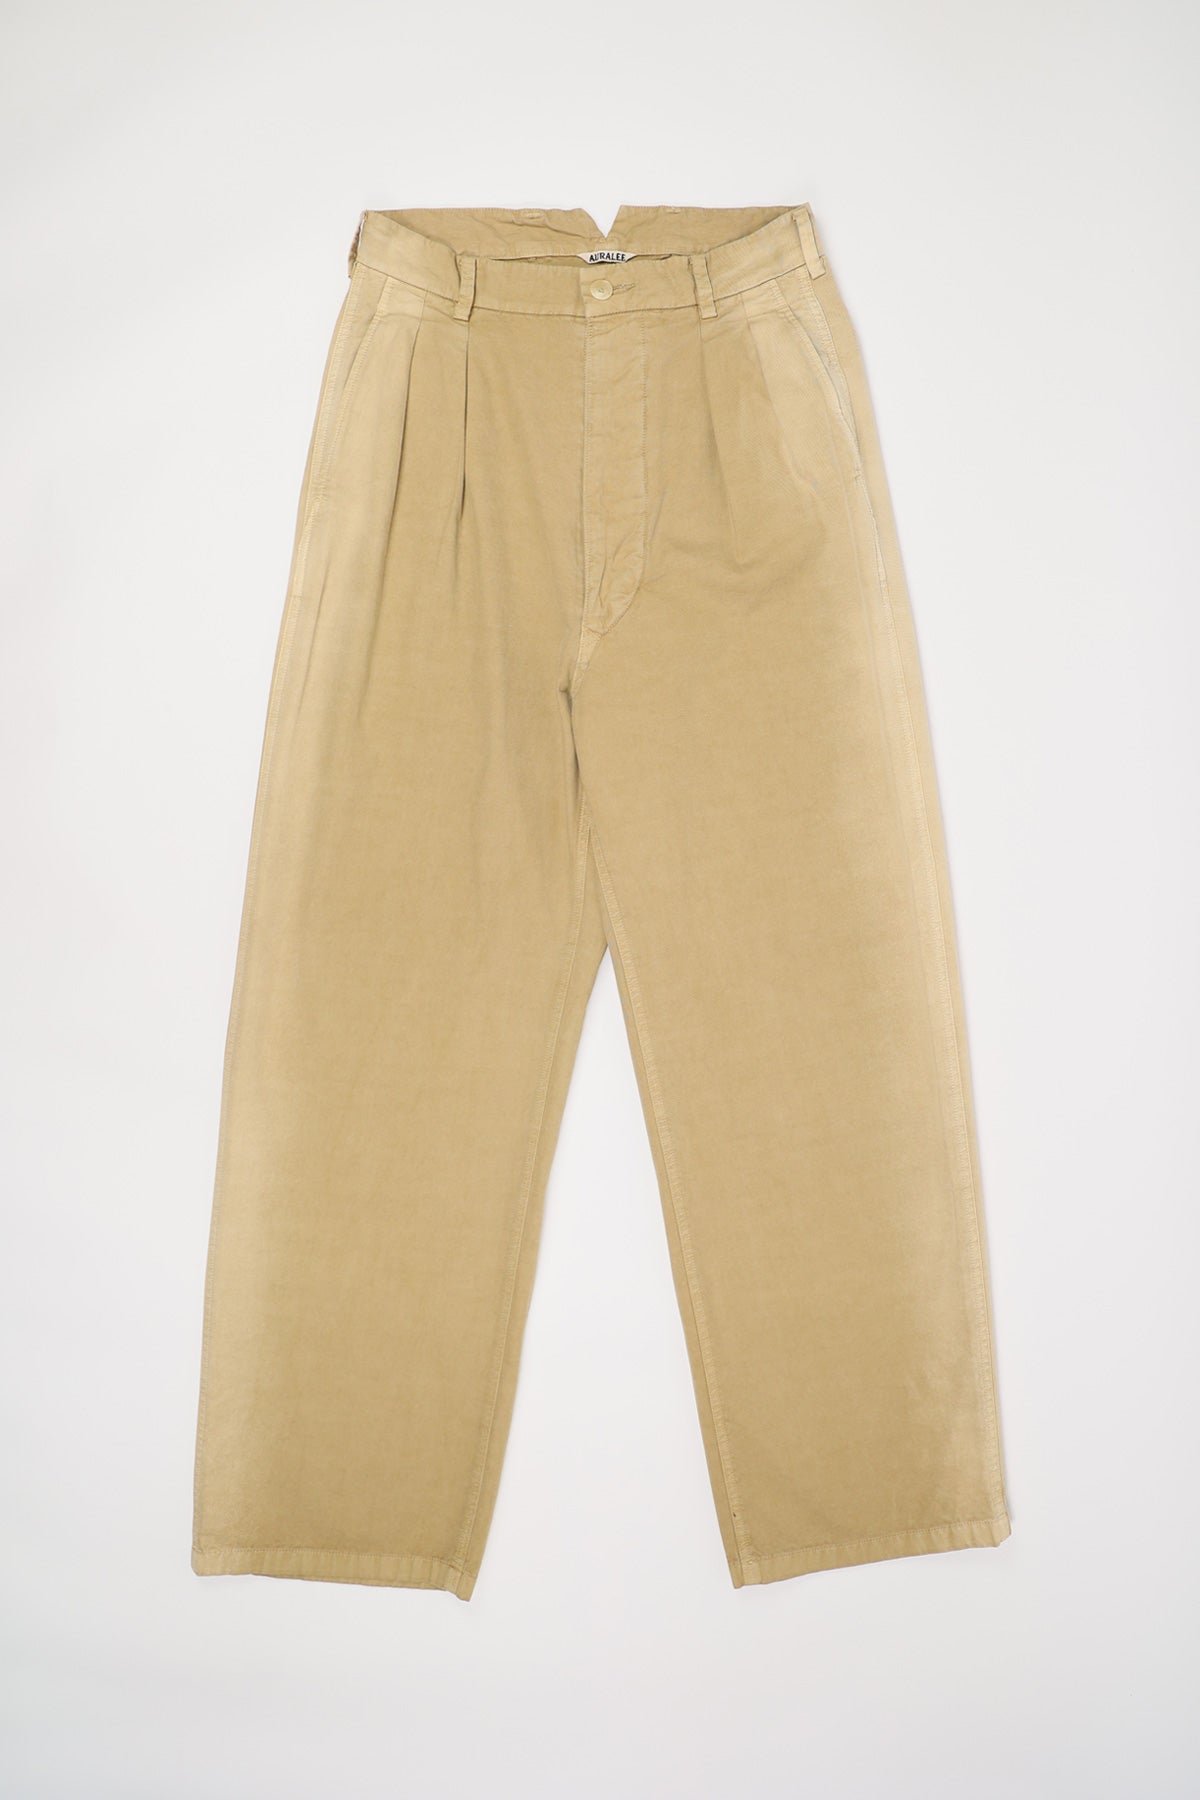 Finx Natural Gabardine Product Dyed Pants - Beige